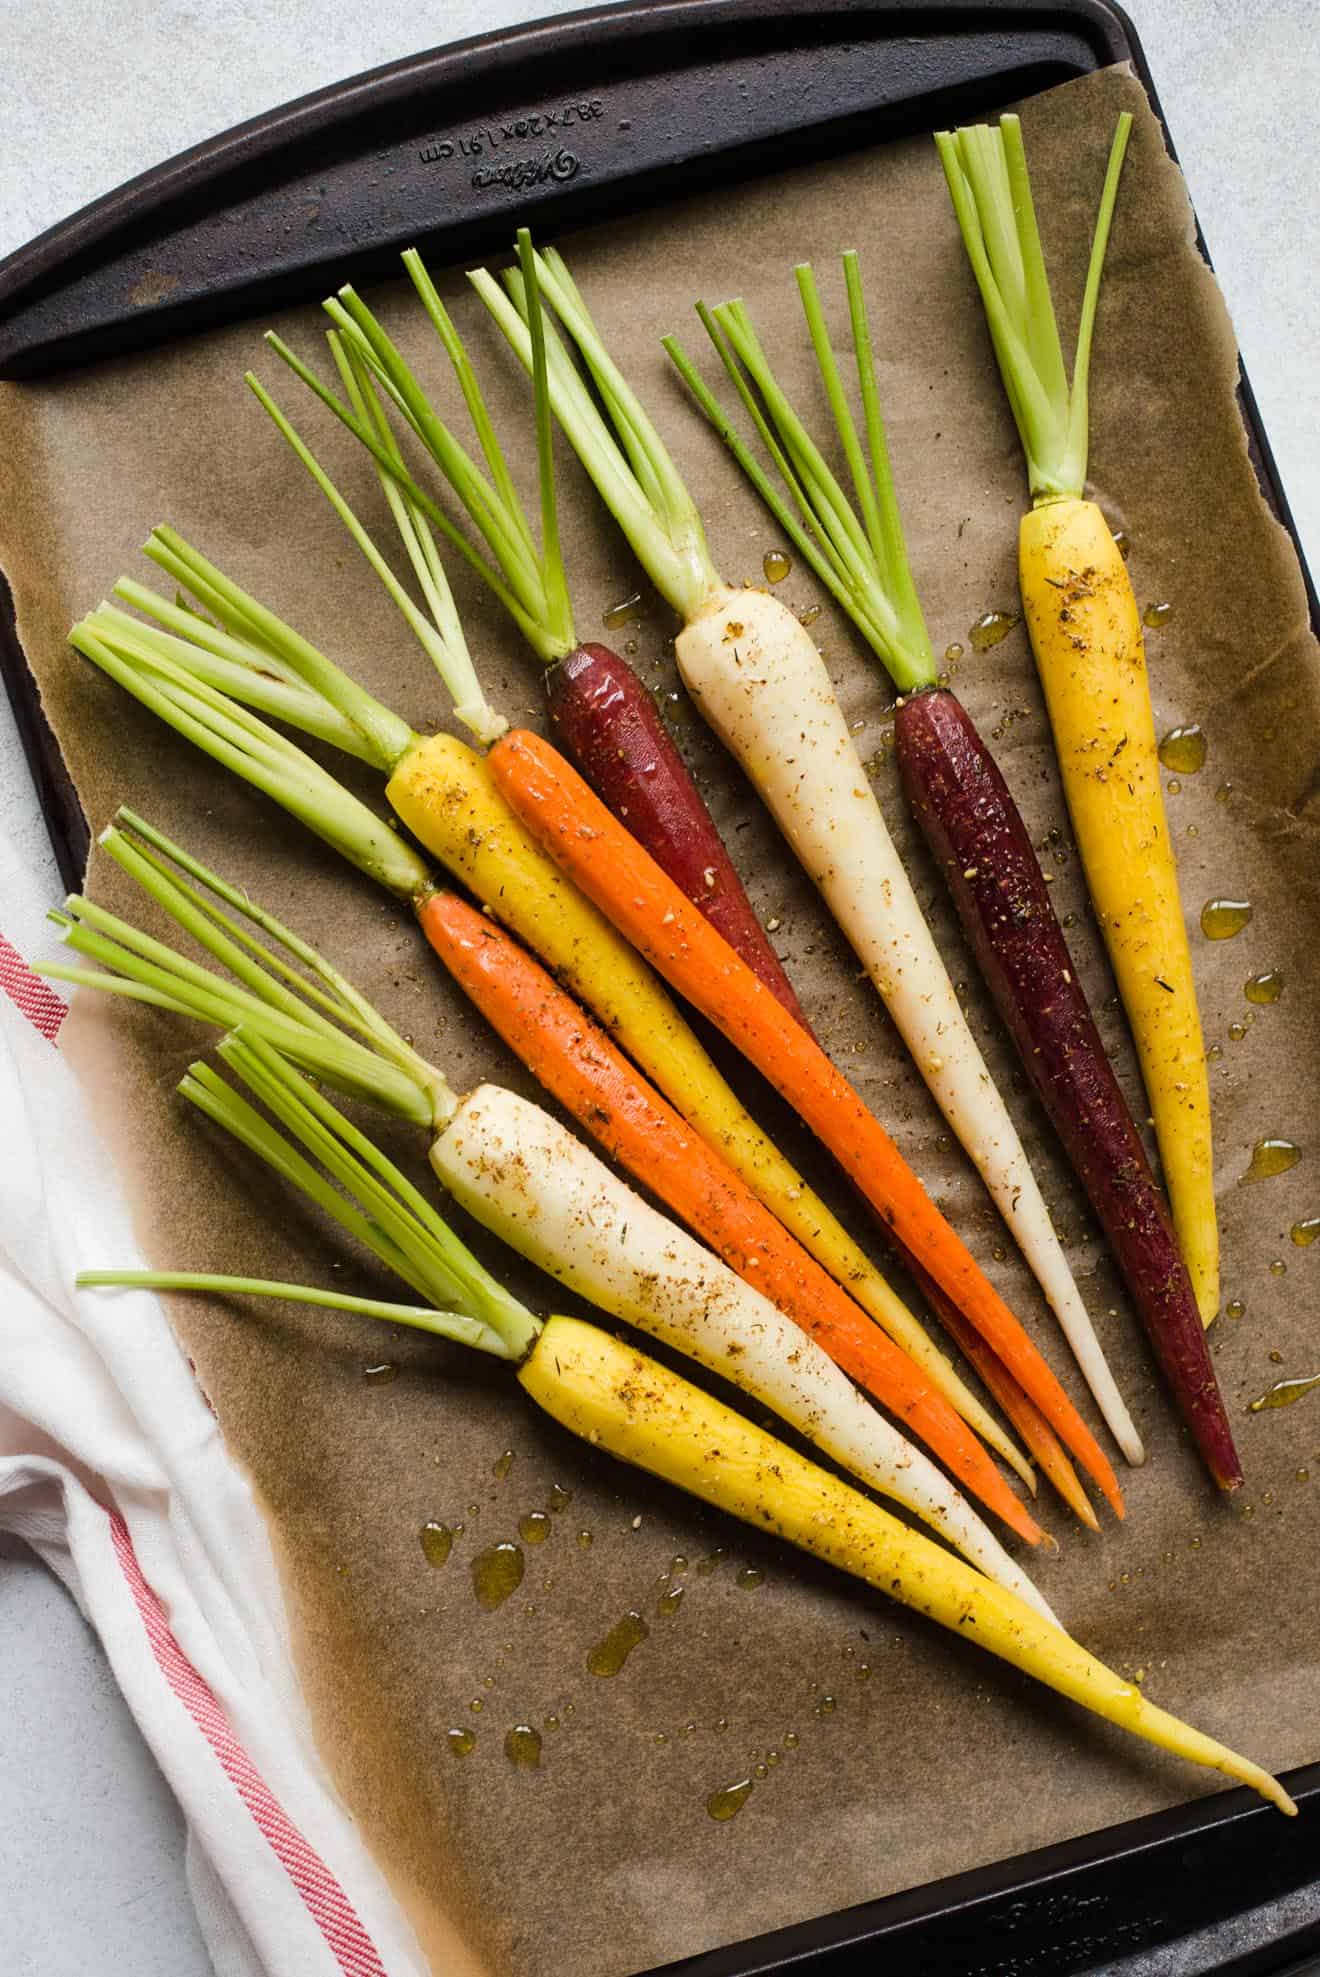 Preparing rainbow carrots for roasting with olive oil, salt, and za'atar